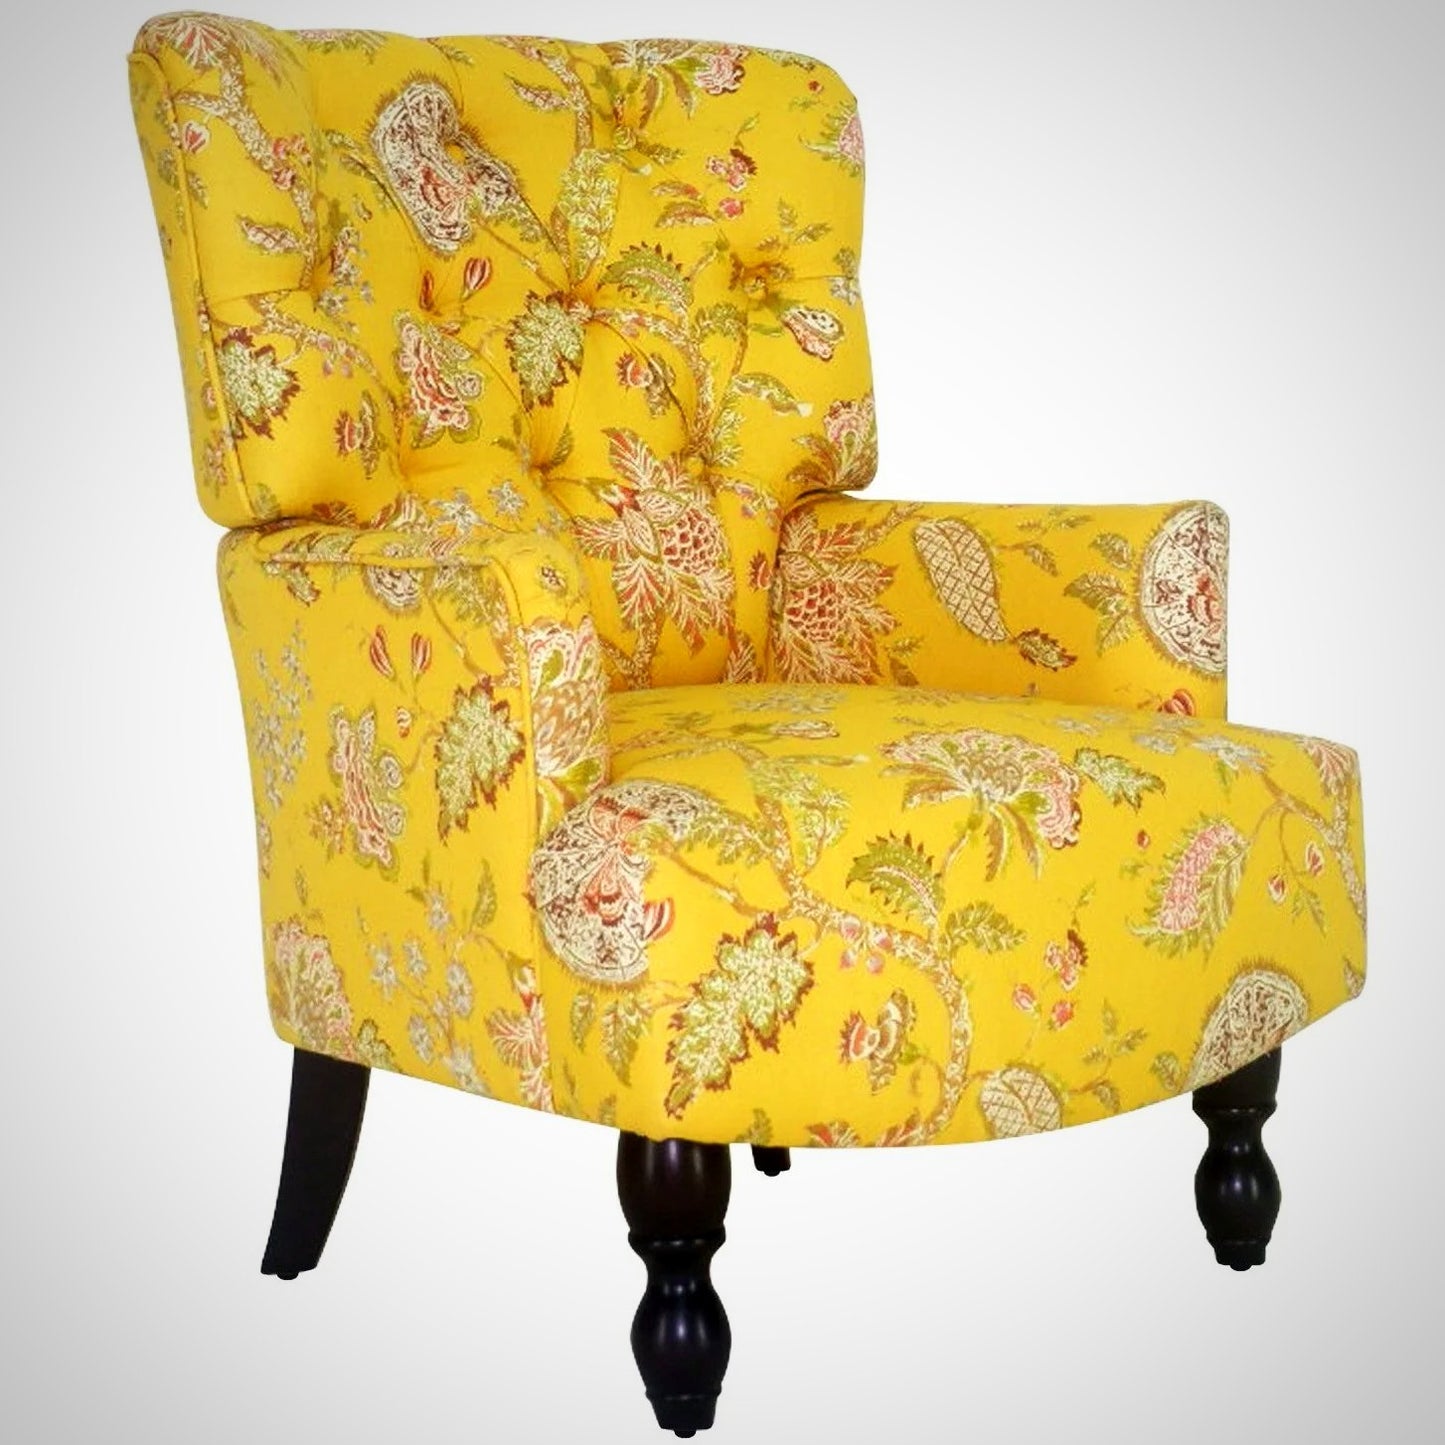 Yolkny Accent Chair